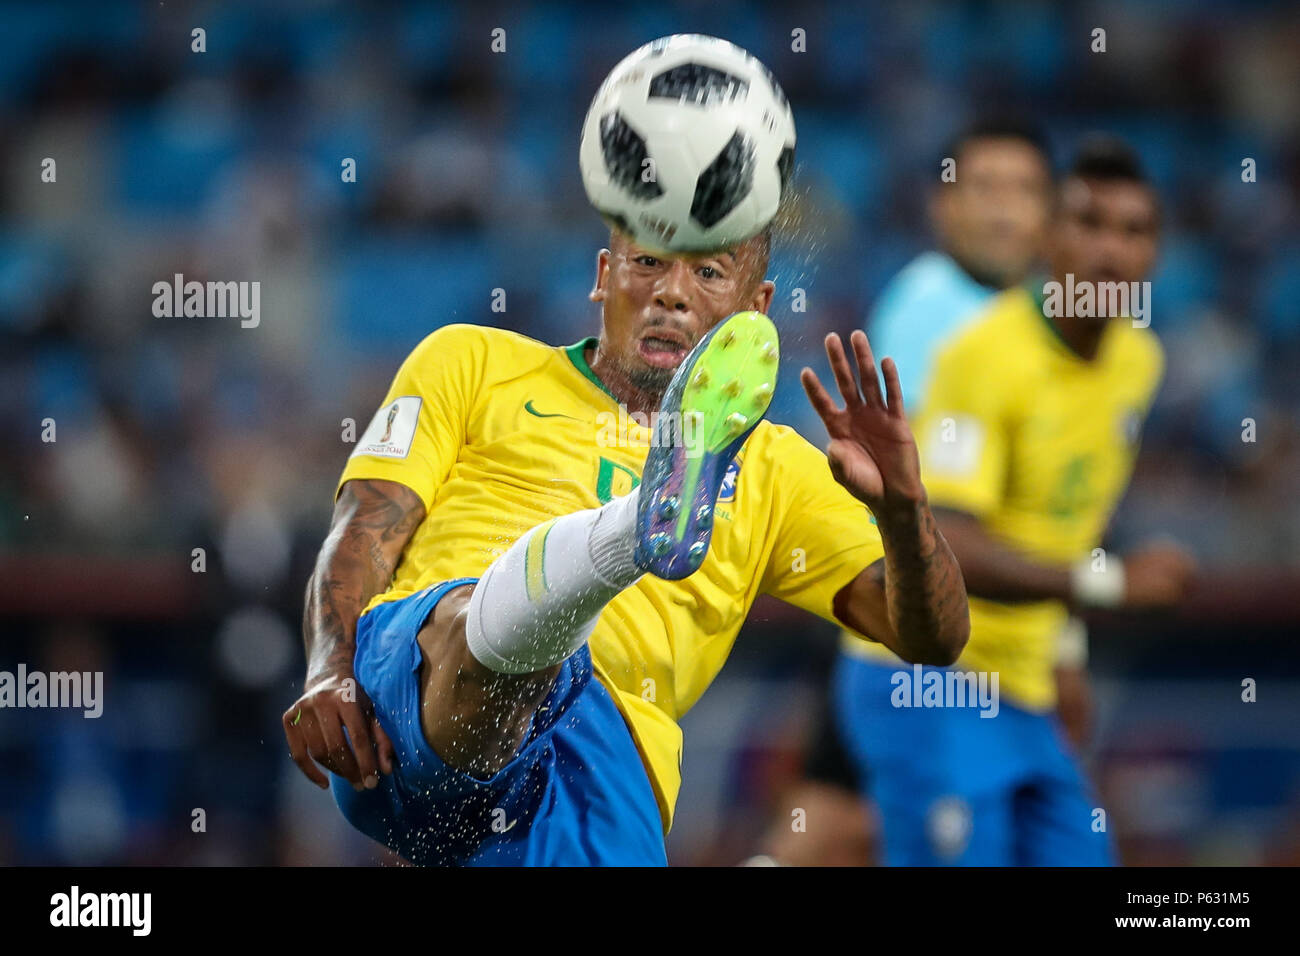 Moscow, China. 19th June, 2018. Gabriel Jesus of Brazil during a match between Serbia and Brazil valid for the third round of group E of the 2018 World Cup, held at the Spartak Stadium. Brazil win over Serbia, 2-0. Credit: Thiago Bernardes/Pacific Press/Alamy Live News Stock Photo